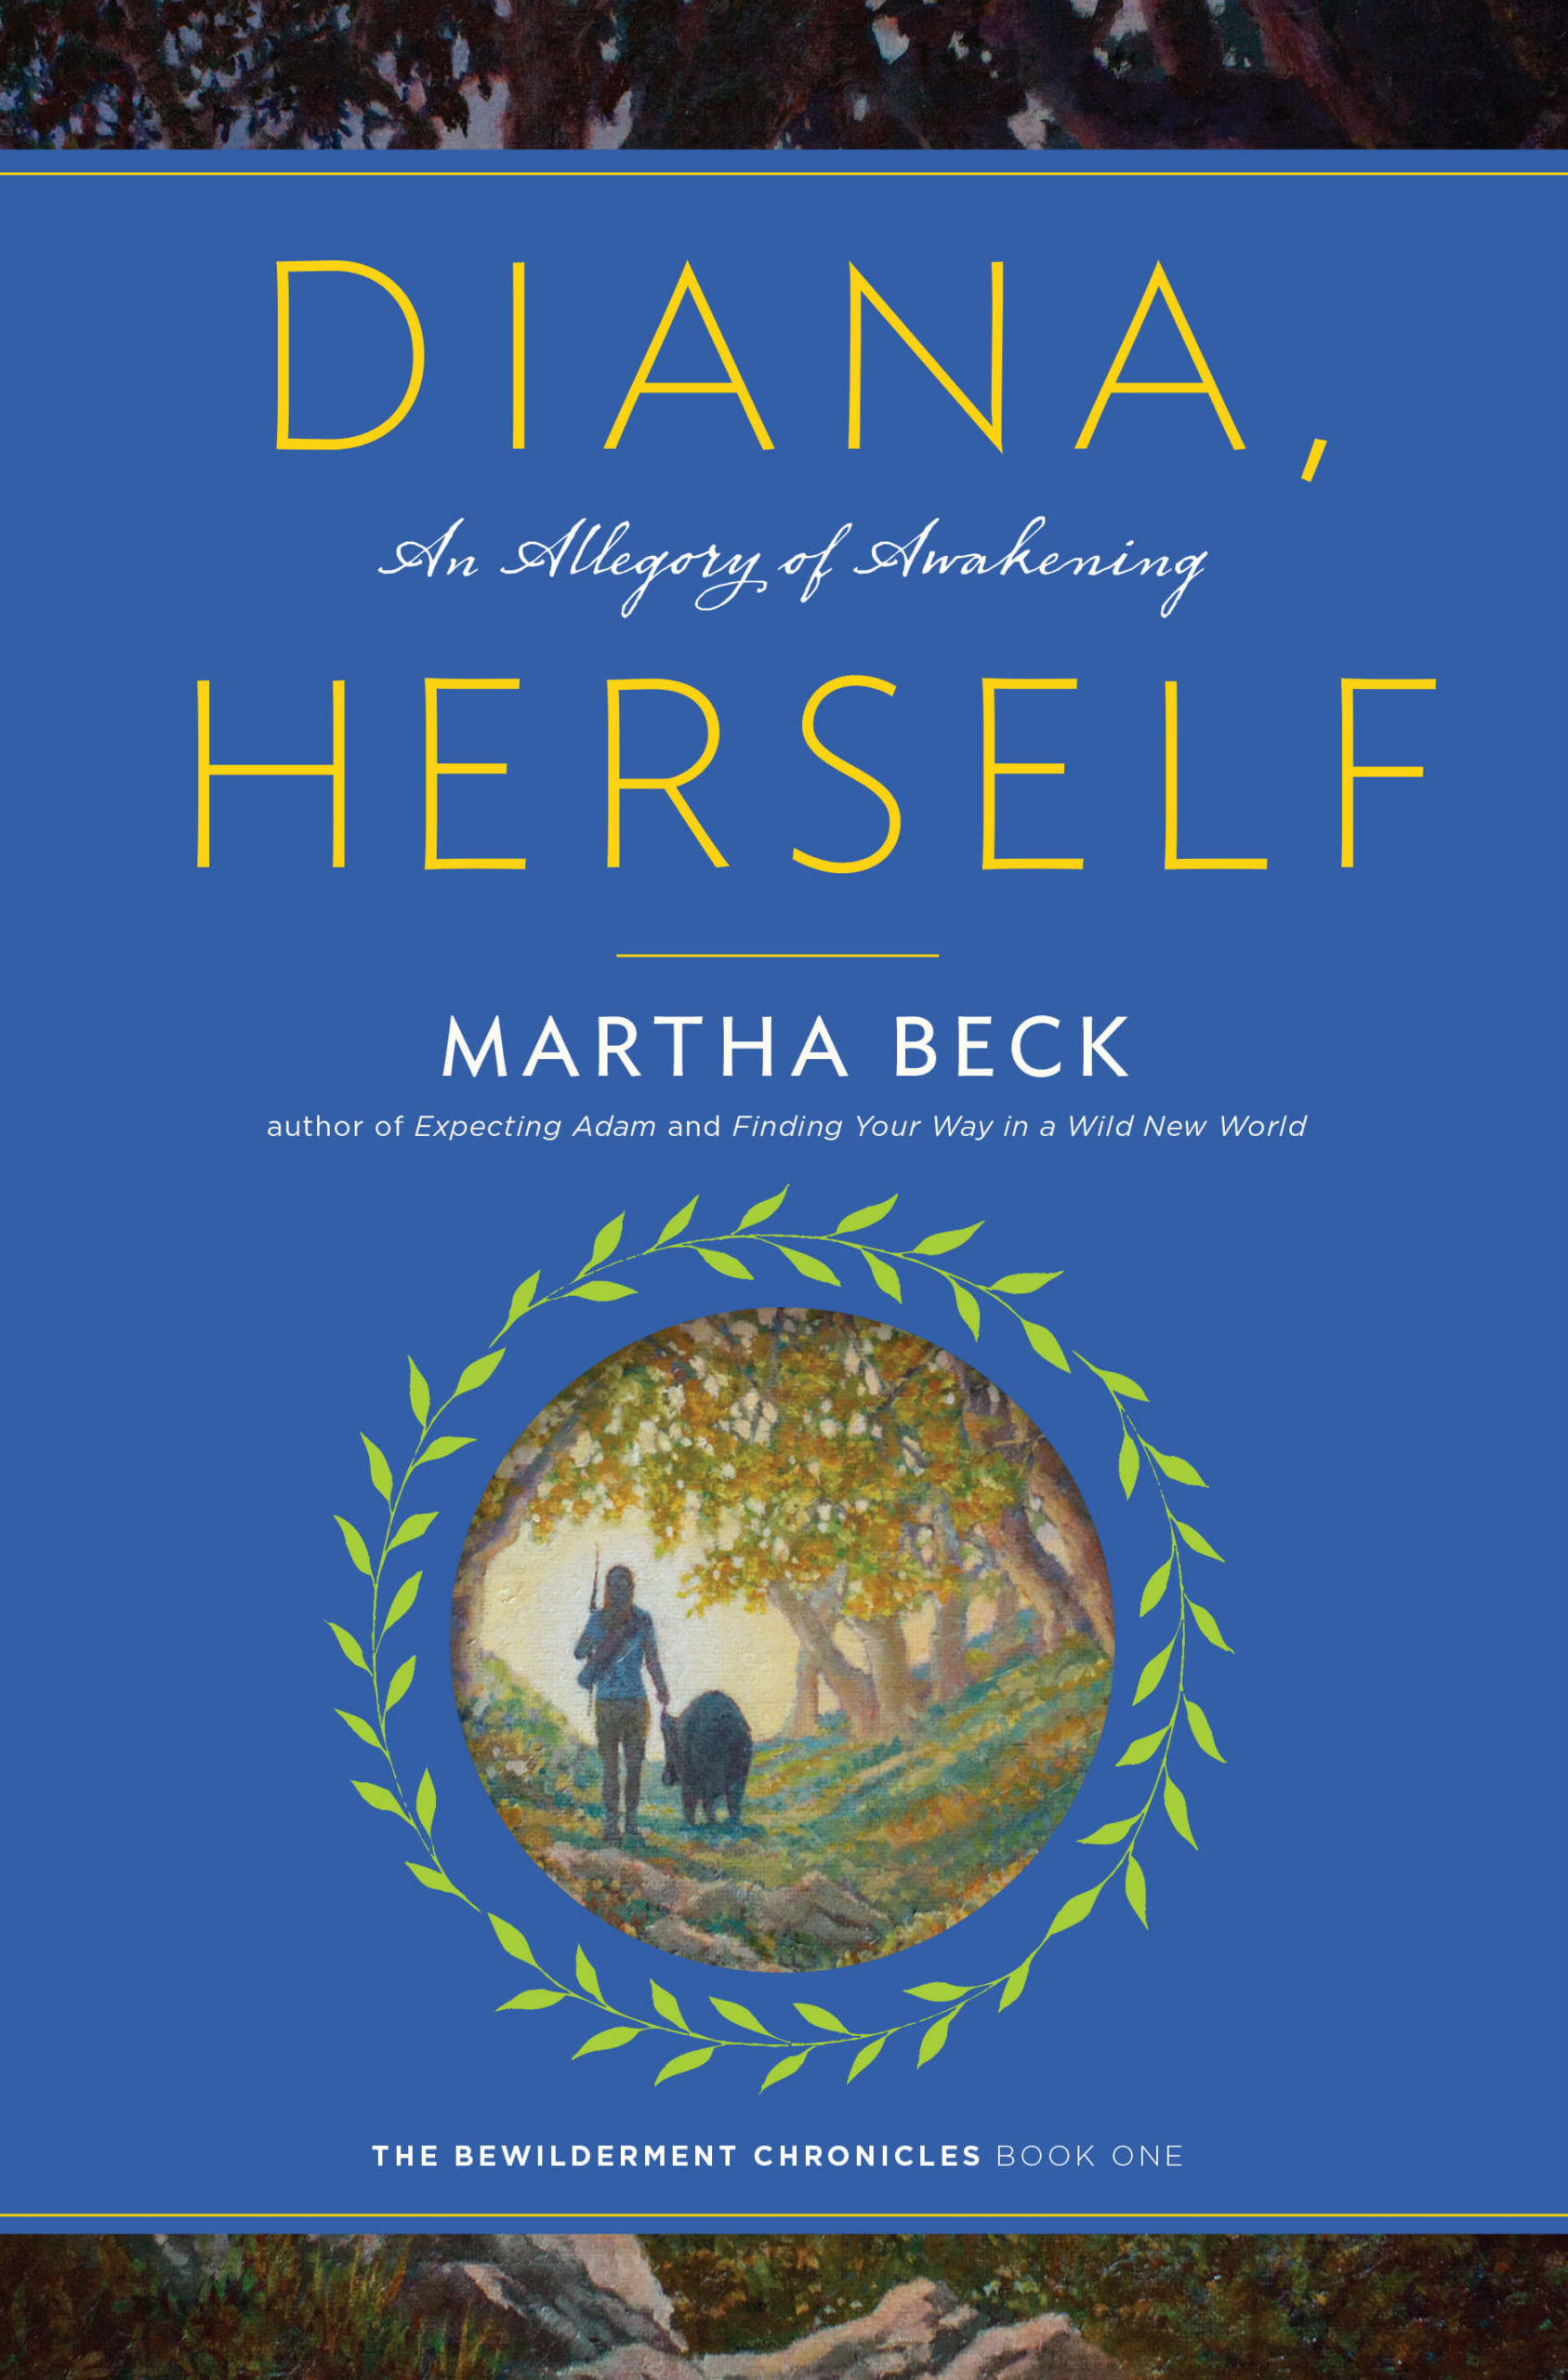 Diana, Herself: An Allegory of Awakening by Martha Beck book cover